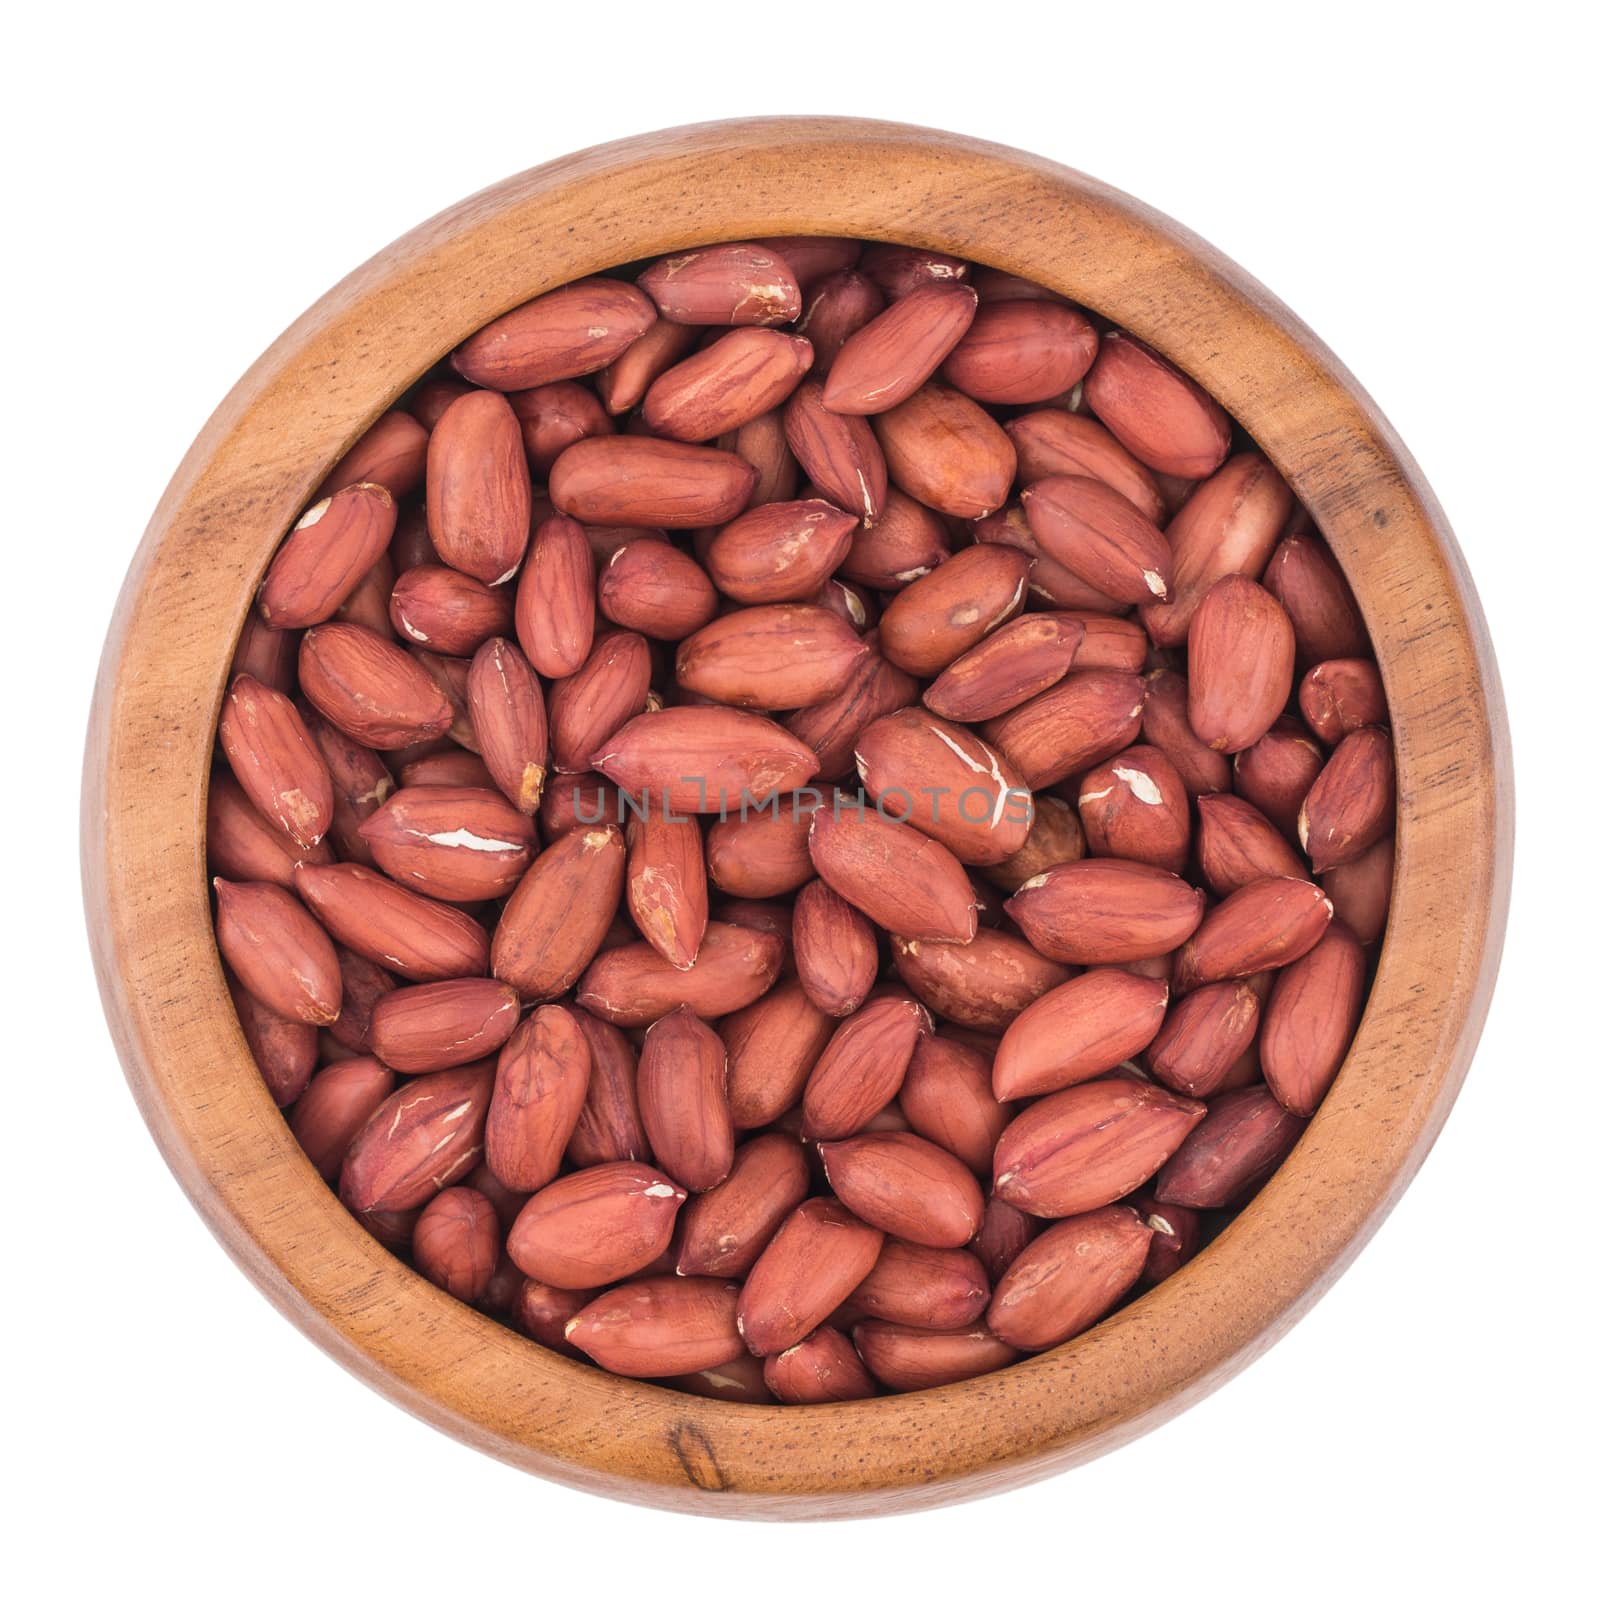 Peanuts in a bowl on a white background.